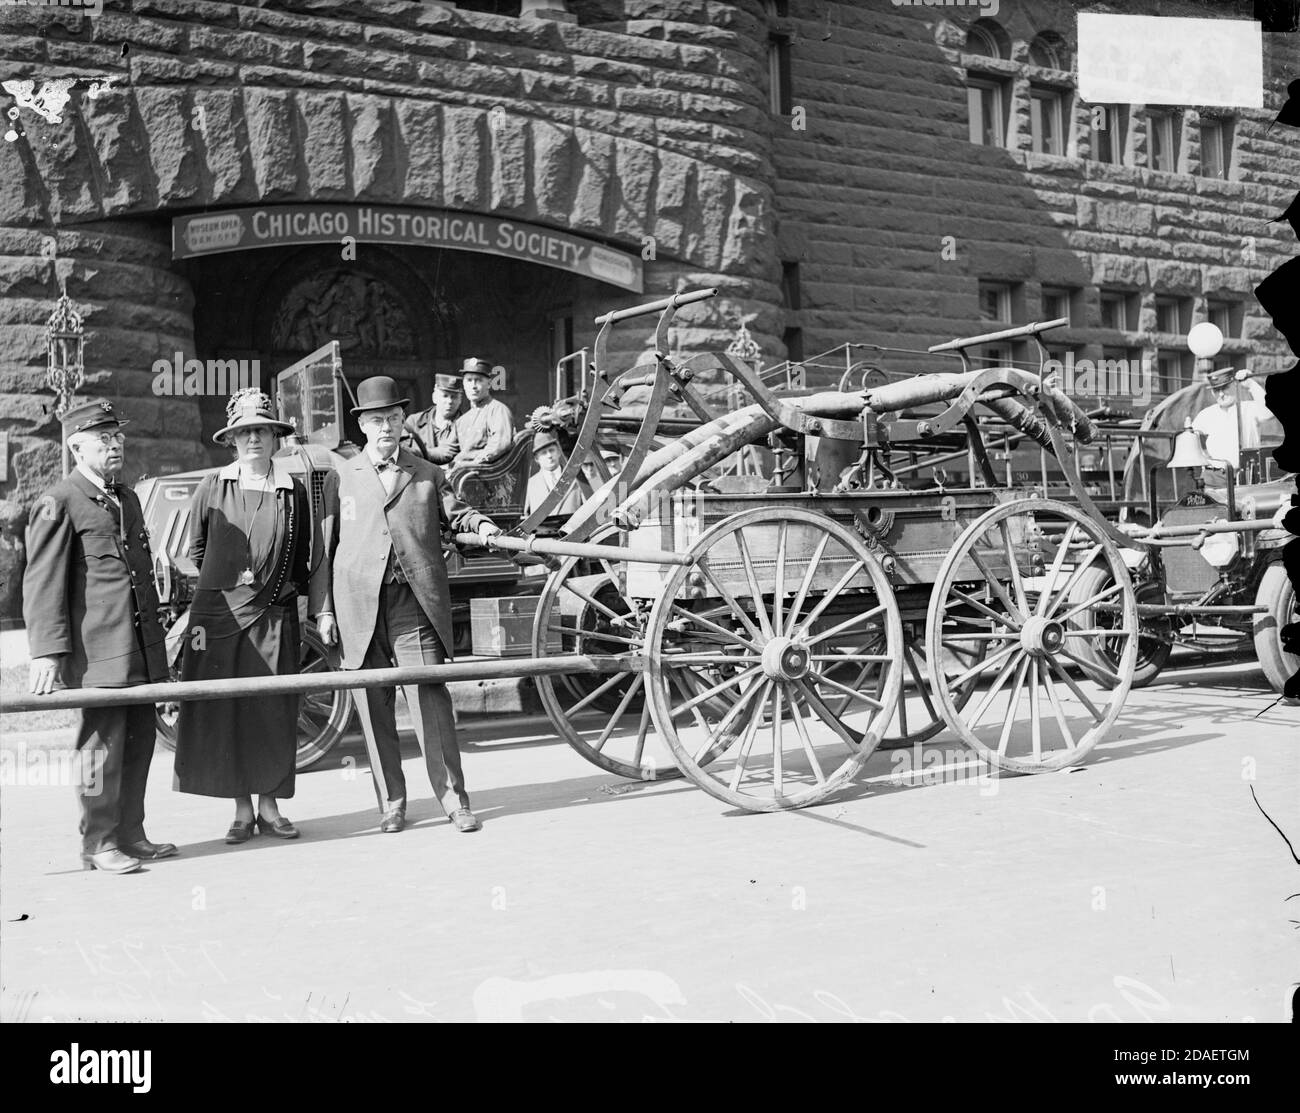 Fireman and other people standing with old-fashioned fire engine in front of the Chicago Historical Society Stock Photo